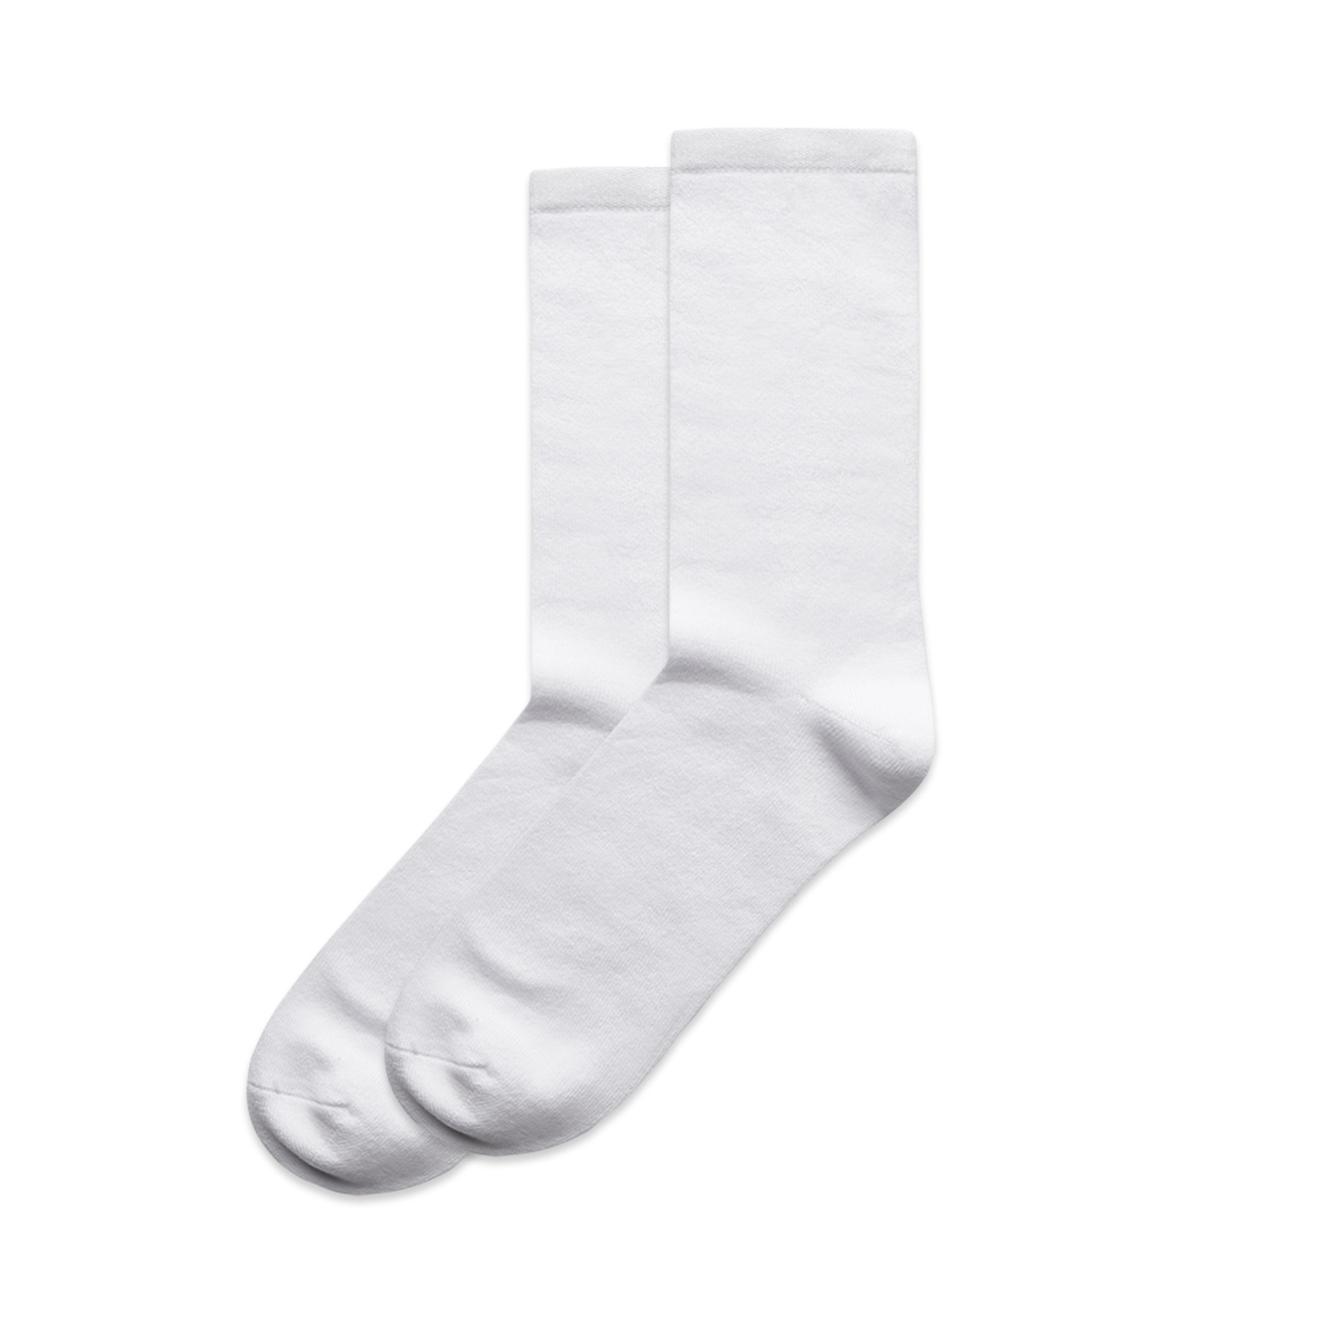 BUSINESS SOCKS (2 PAIRS) - 121 offers at $20 in AS Colour